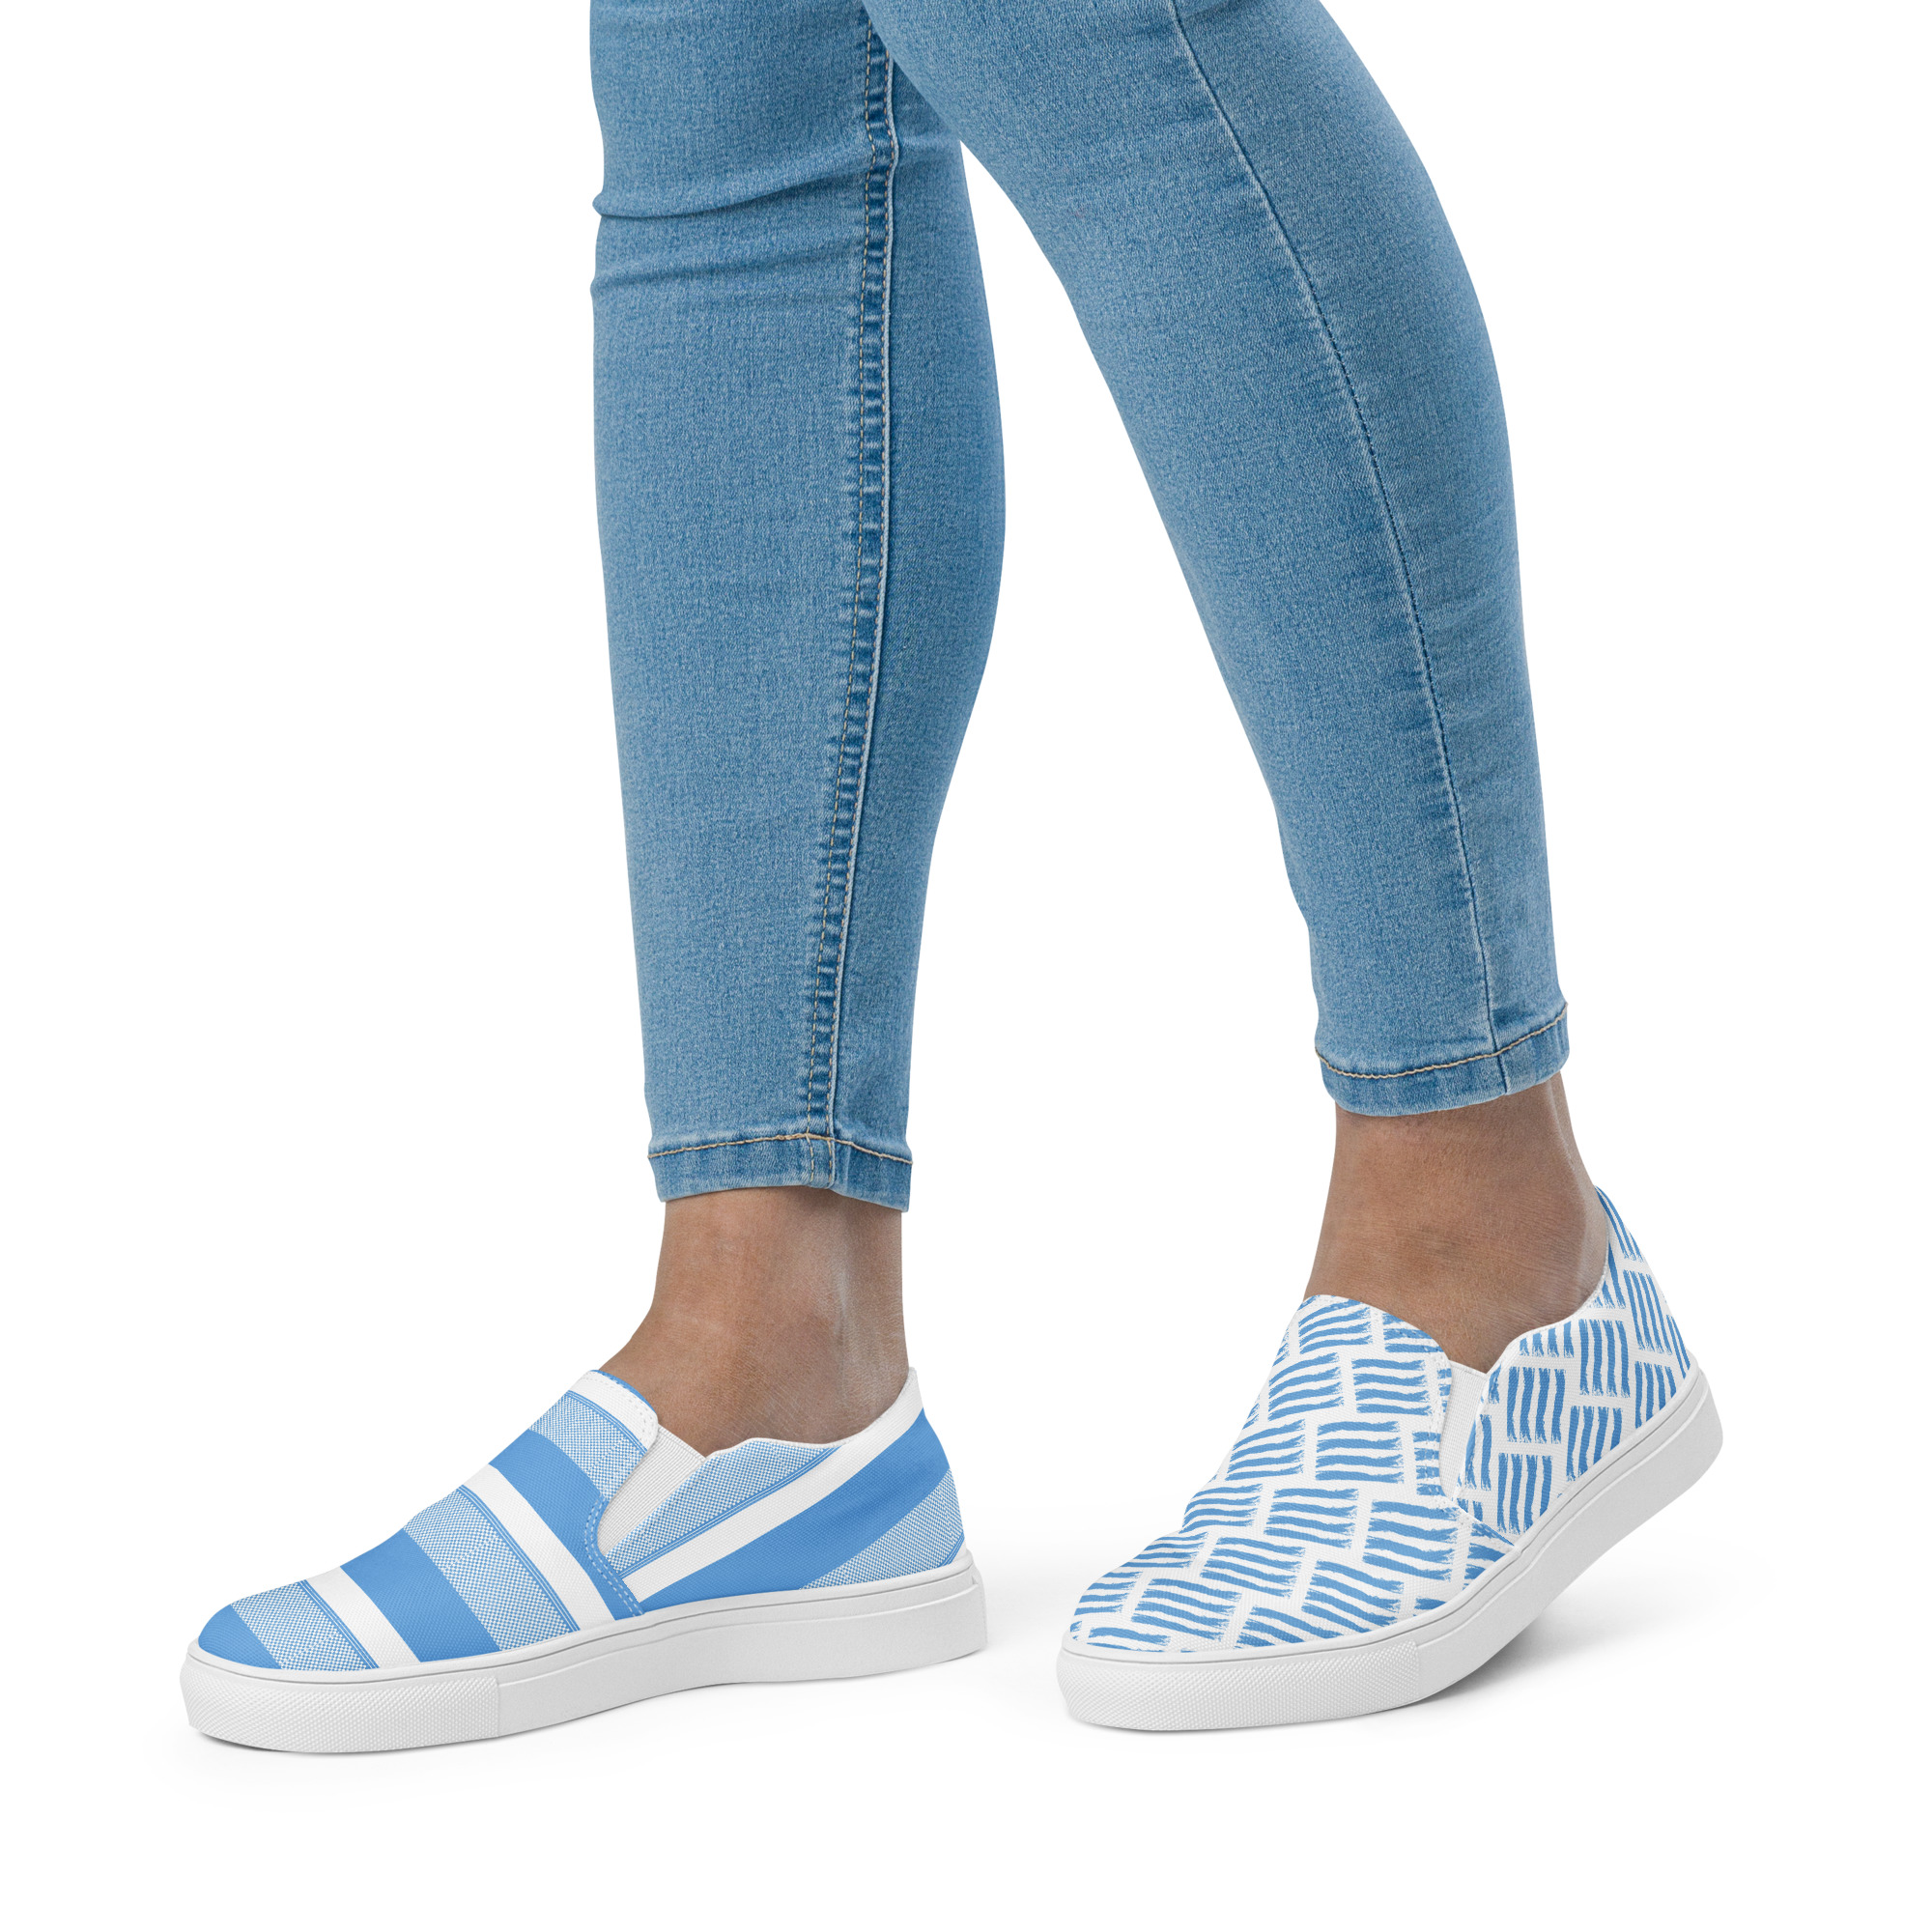 Introducing the "Argentinas" ...the light blue and white Women Slip on Canvas Shoes in the 2023 ACVKs shoe line.